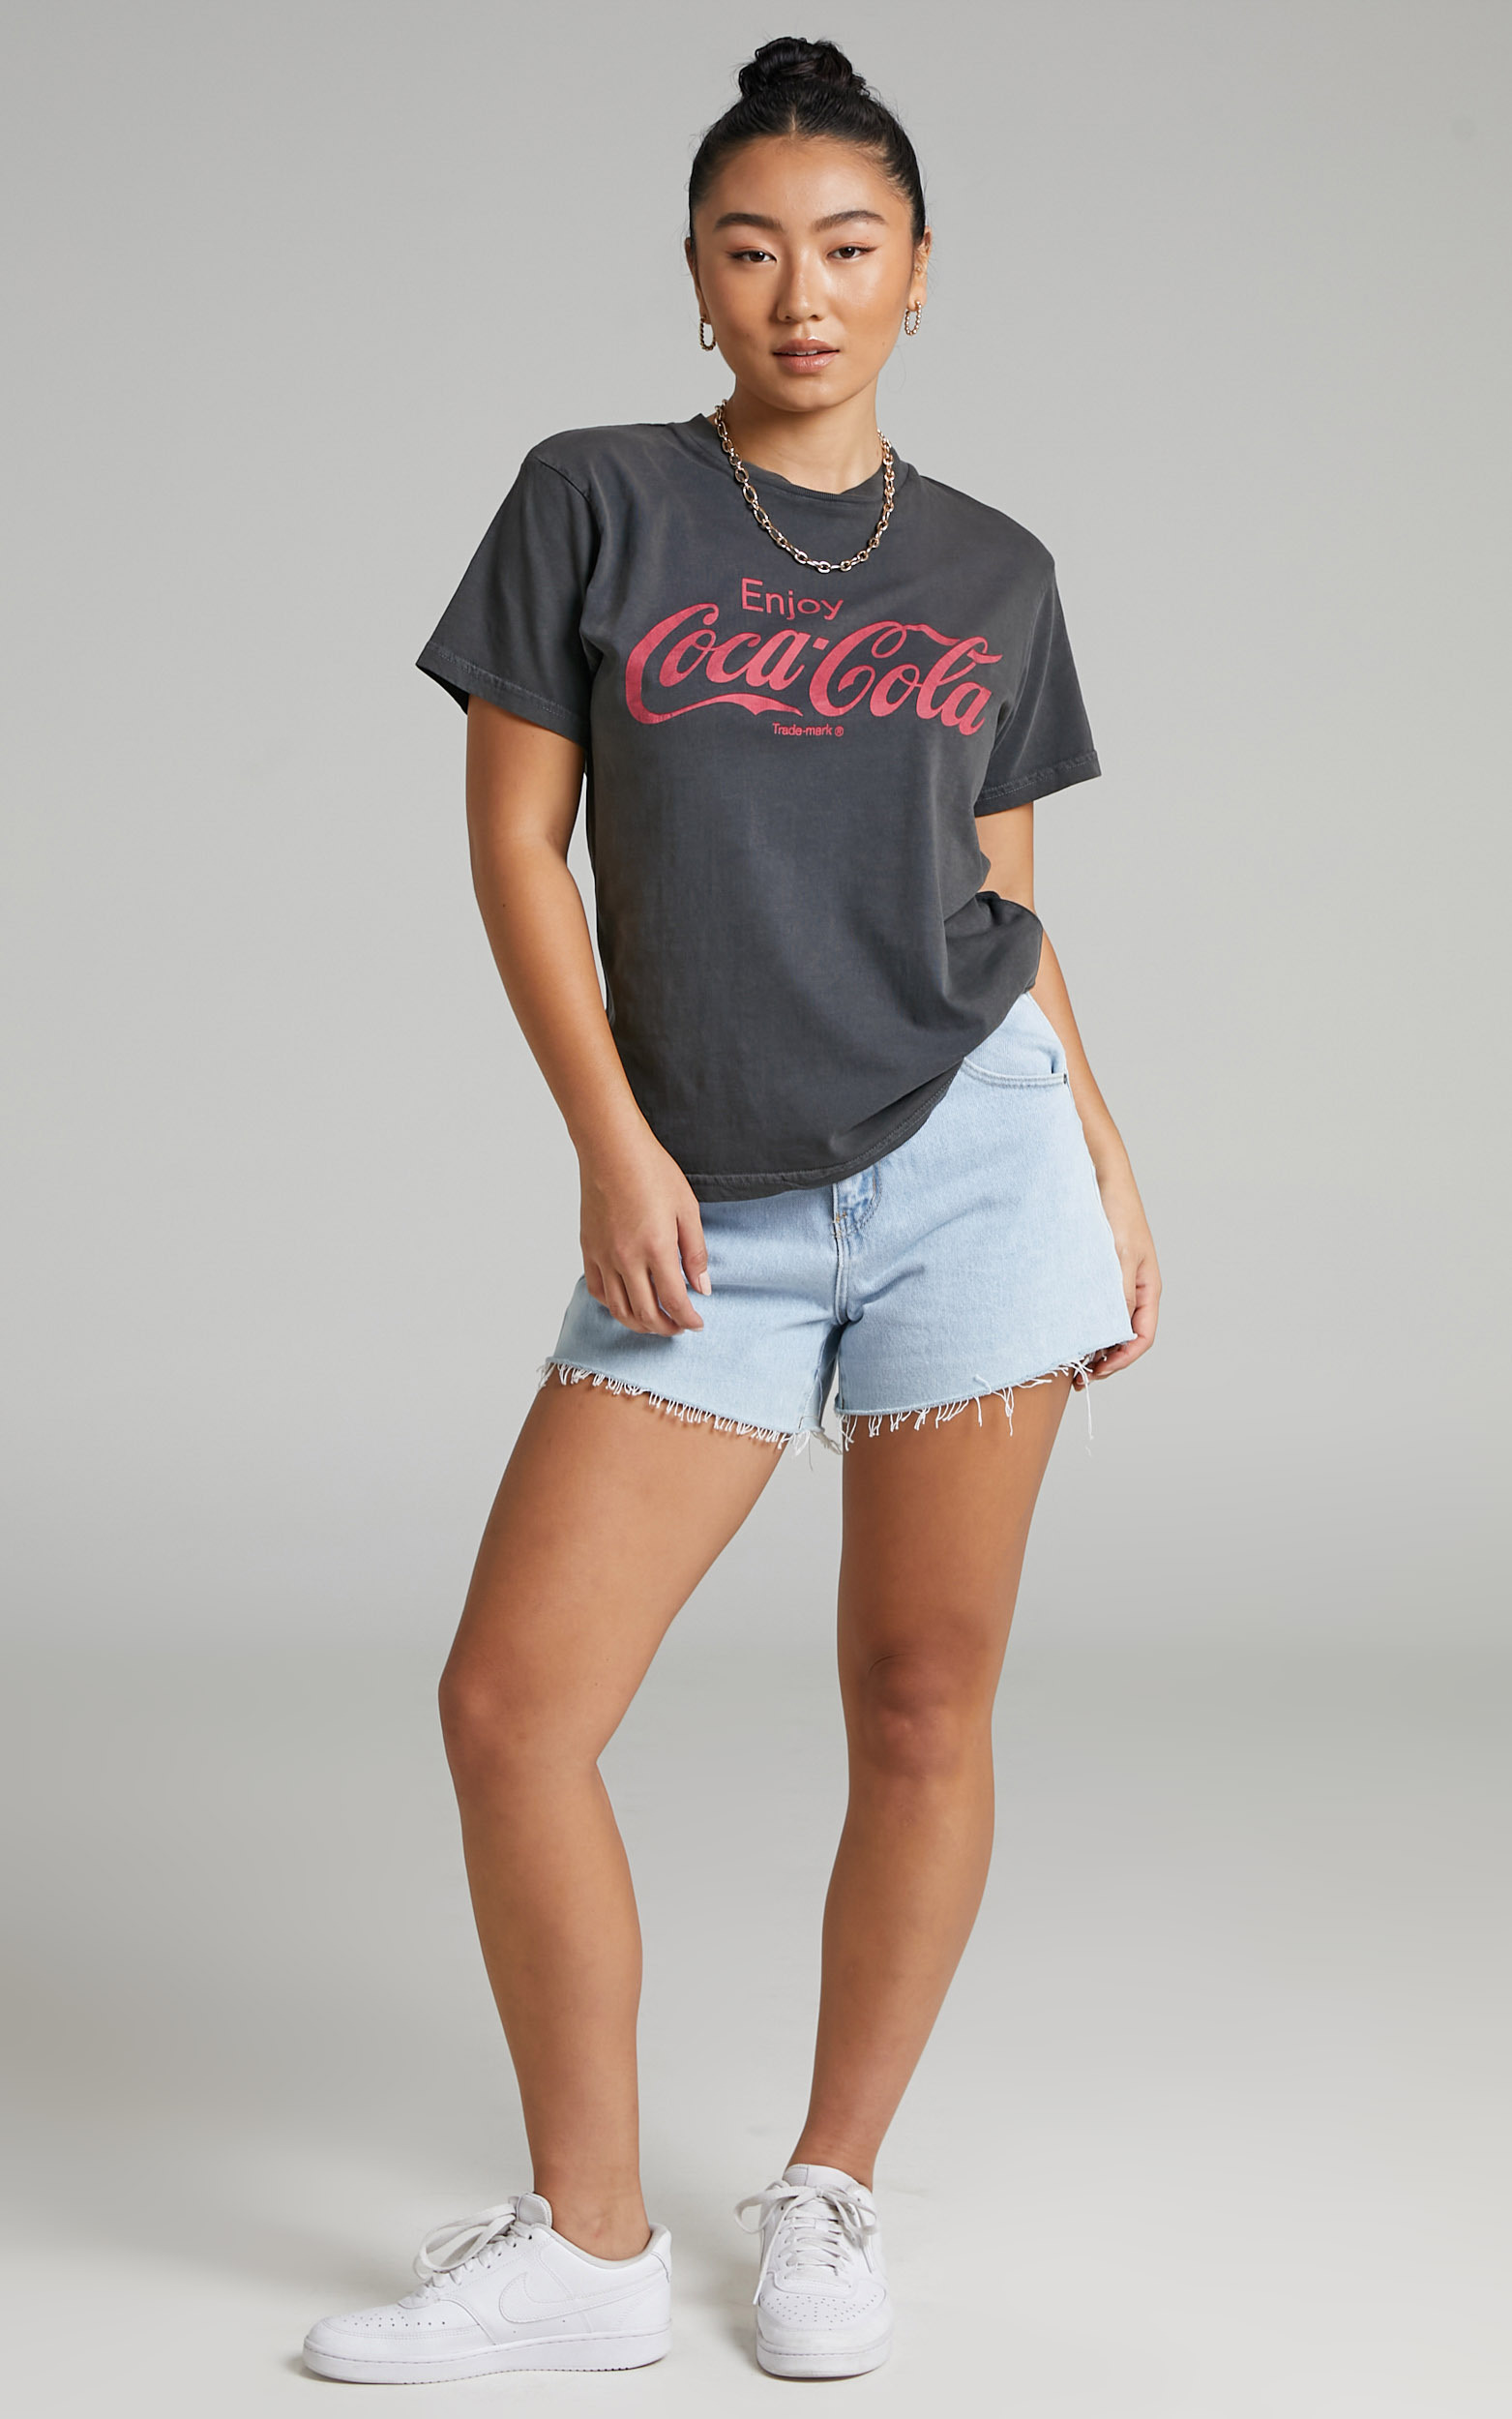 Rolla's - COCA COLA CLASSIC TOMBOY TEE in Washed Black - 06, BLK1, hi-res image number null